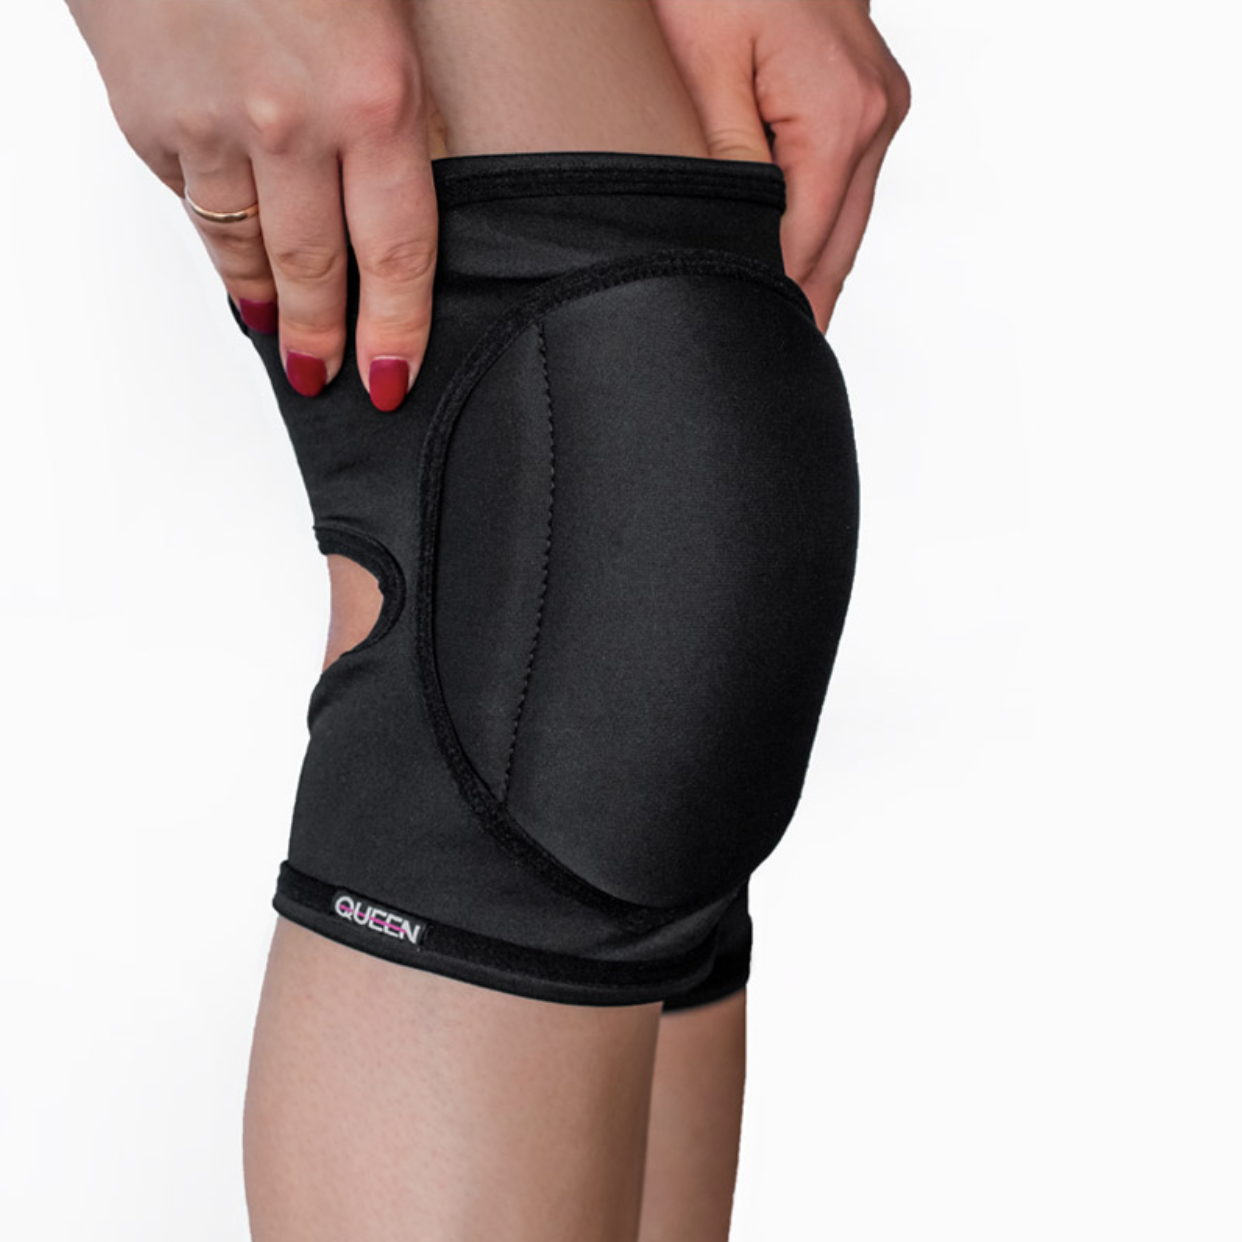 black knee pads for floorwork and pole dancing